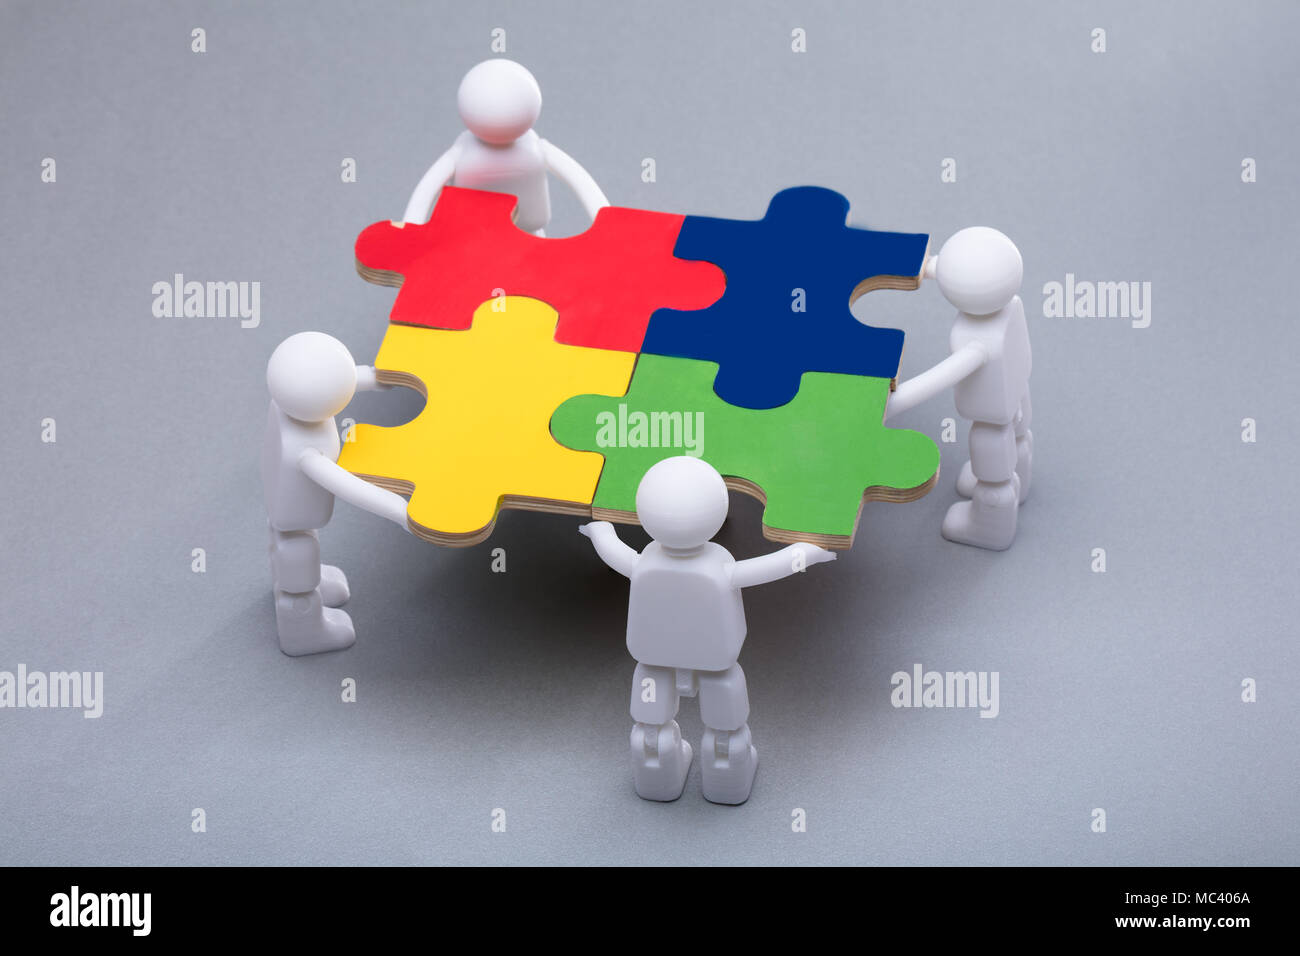 High Angle View Of Human Figures Solving Multi Colored Jigsaw Puzzles Stock Photo